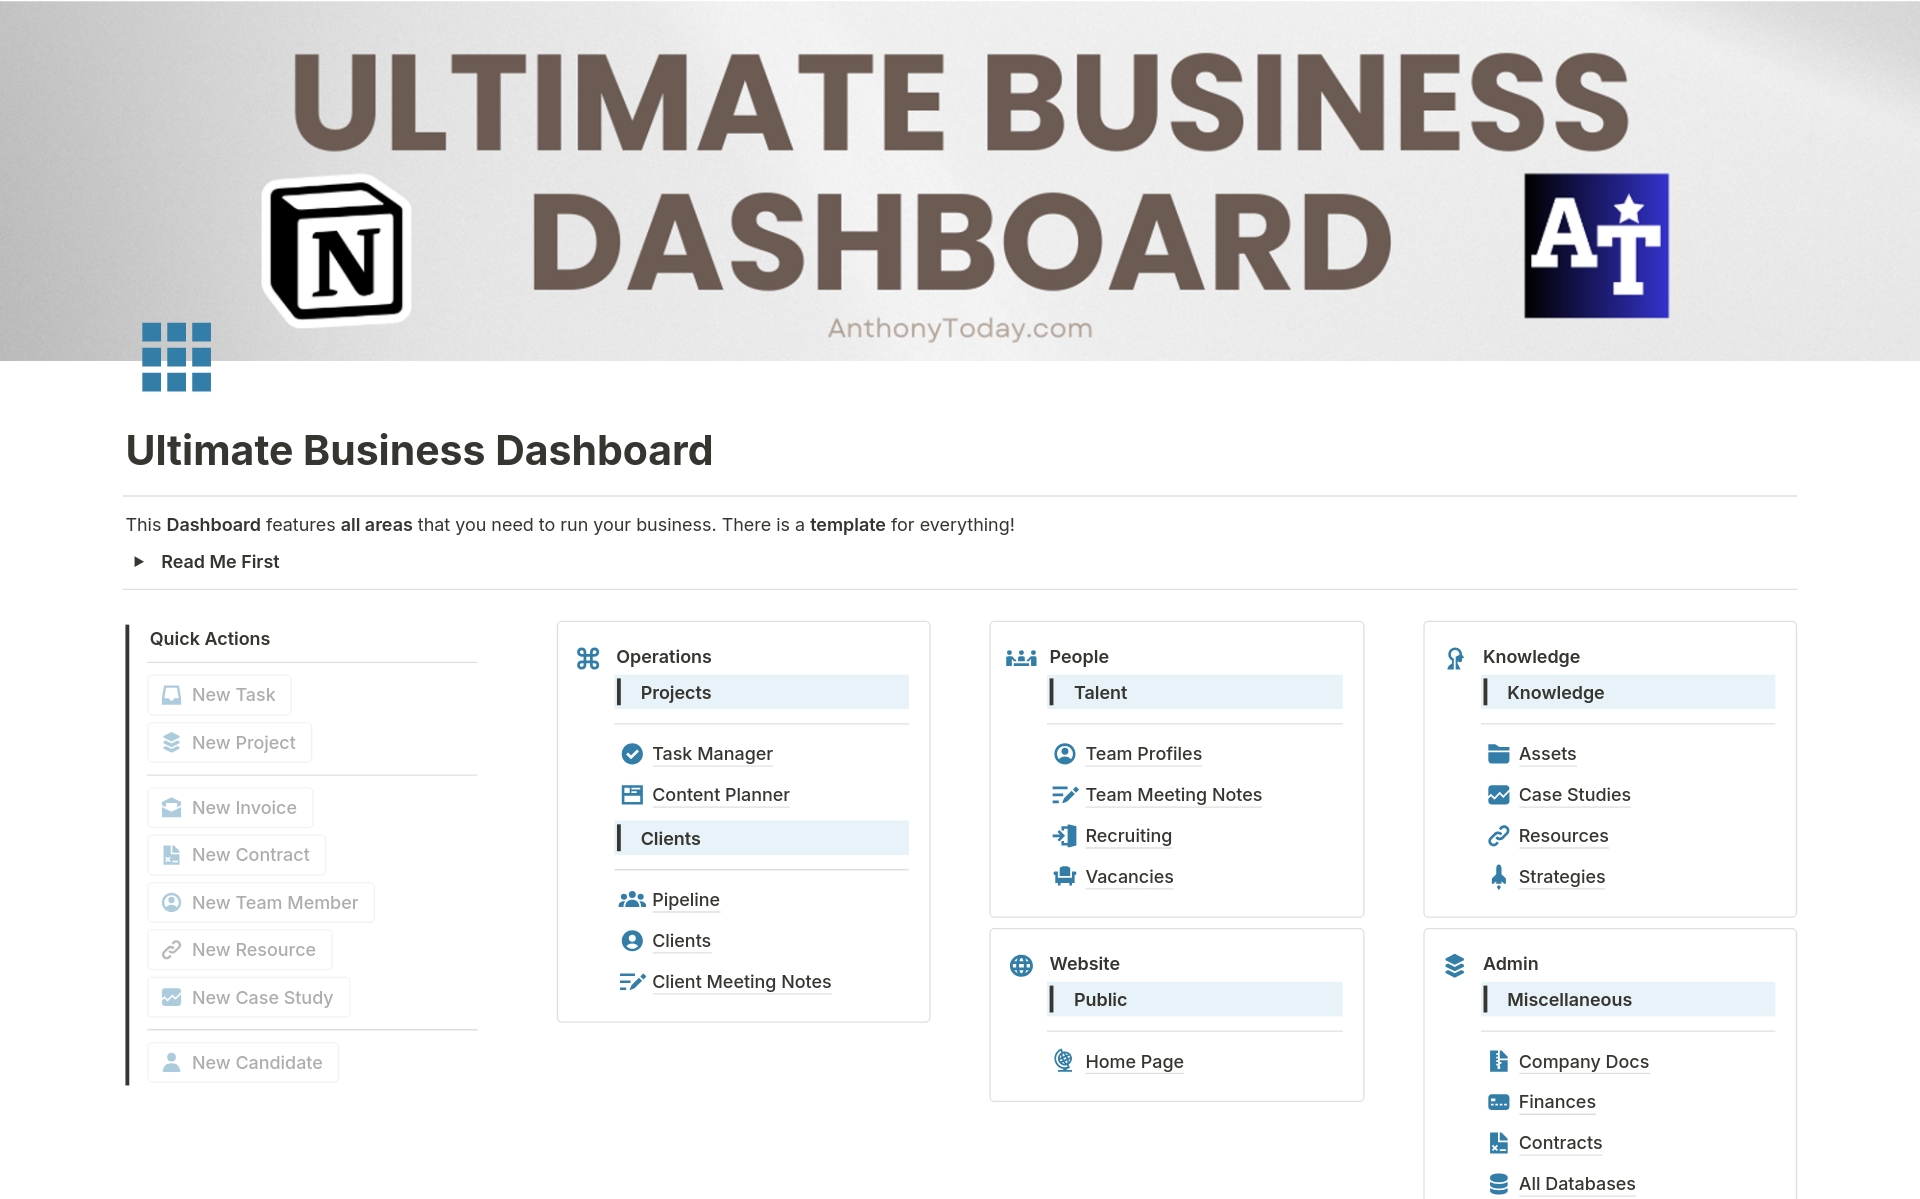 Supercharge your business with this Ultimate Business Dashboard to manage your clients, projects, finances, and more, in one place!